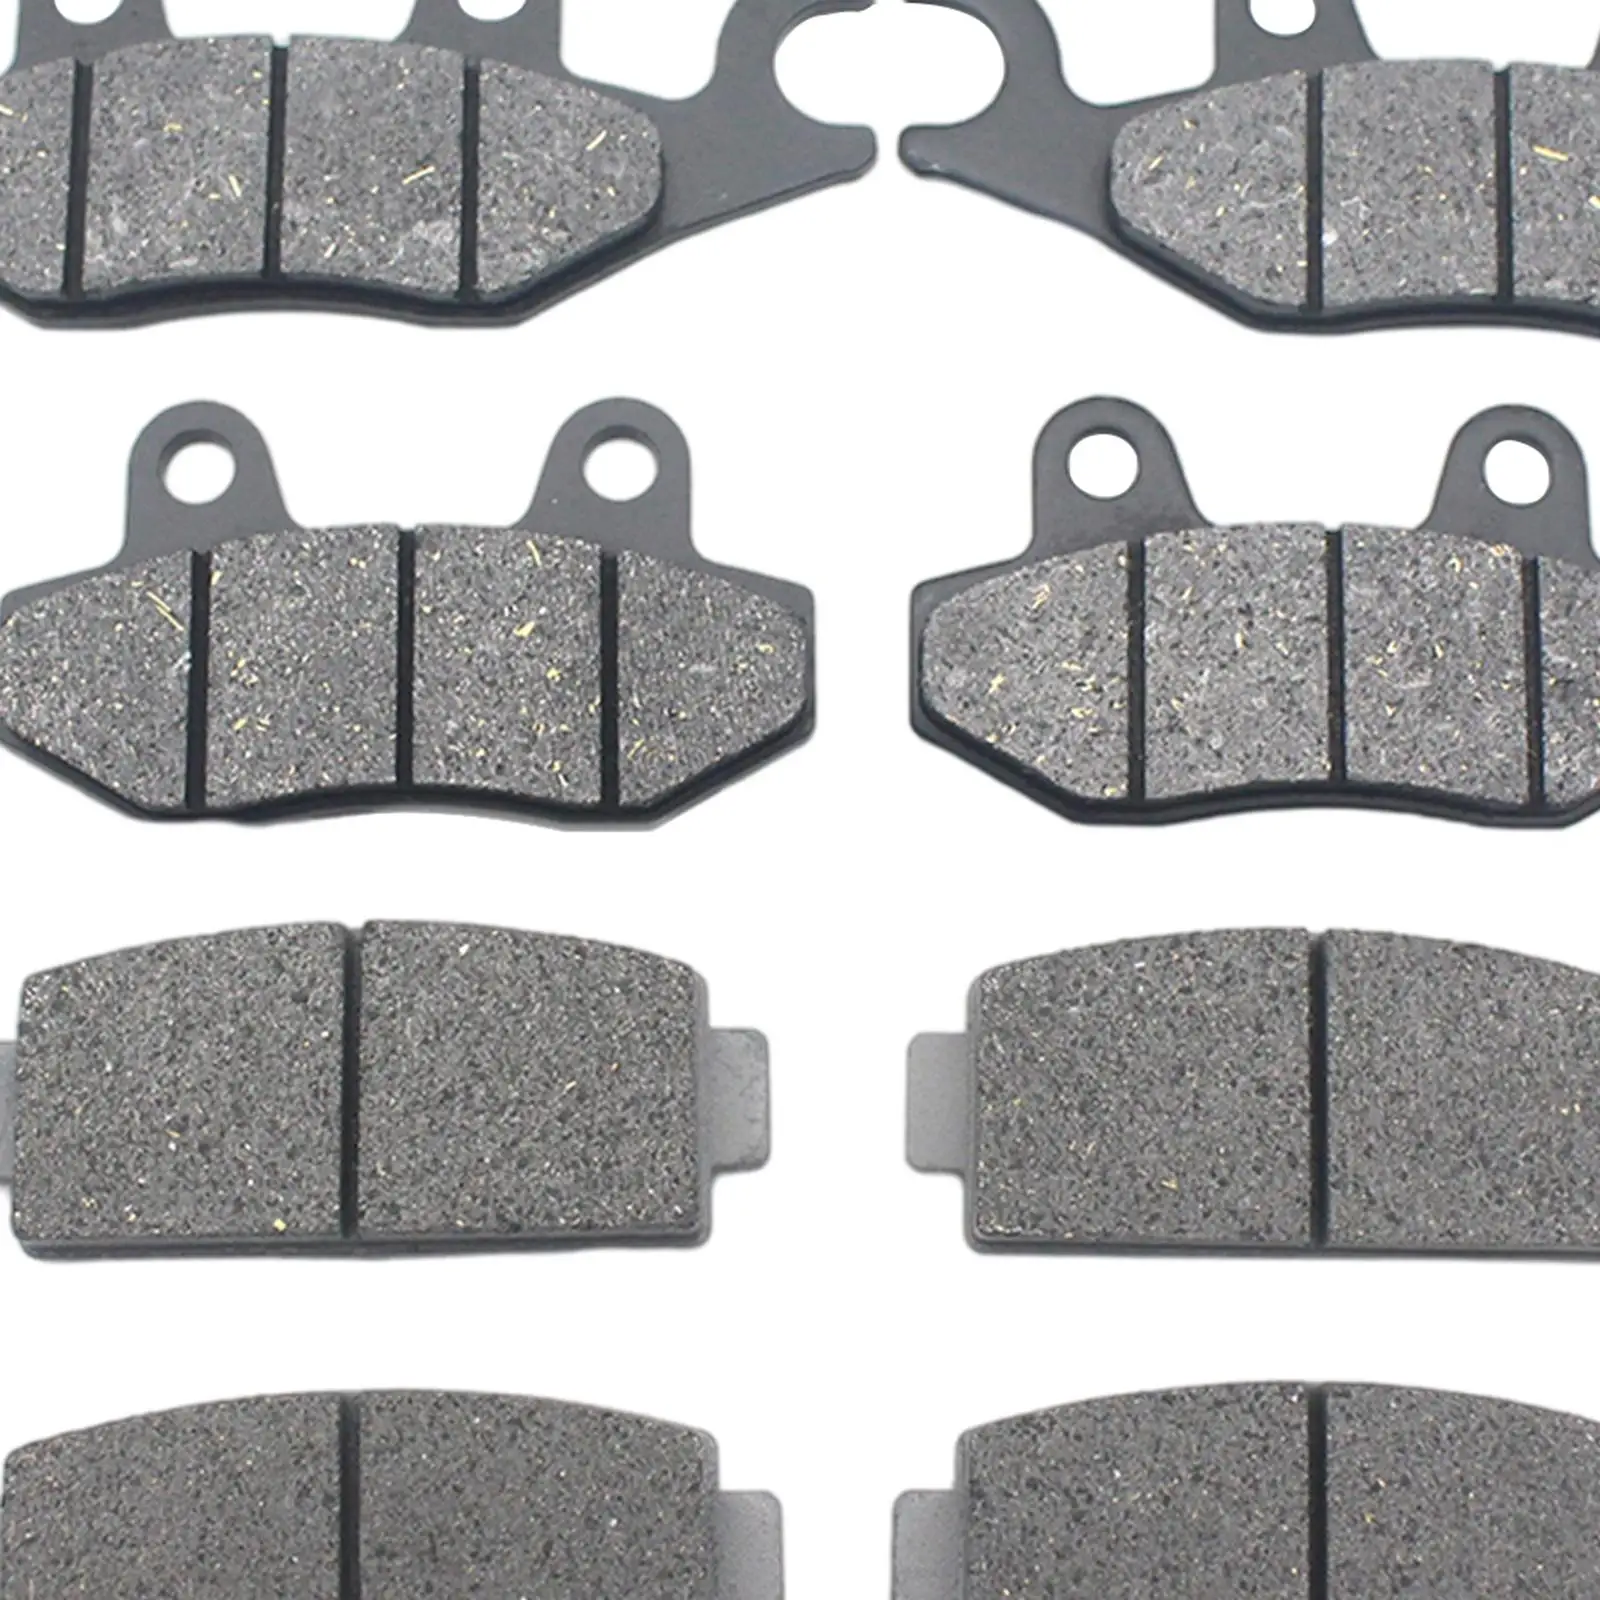 Front Rear Motorcycle Brake Pads Brake System Replacement for